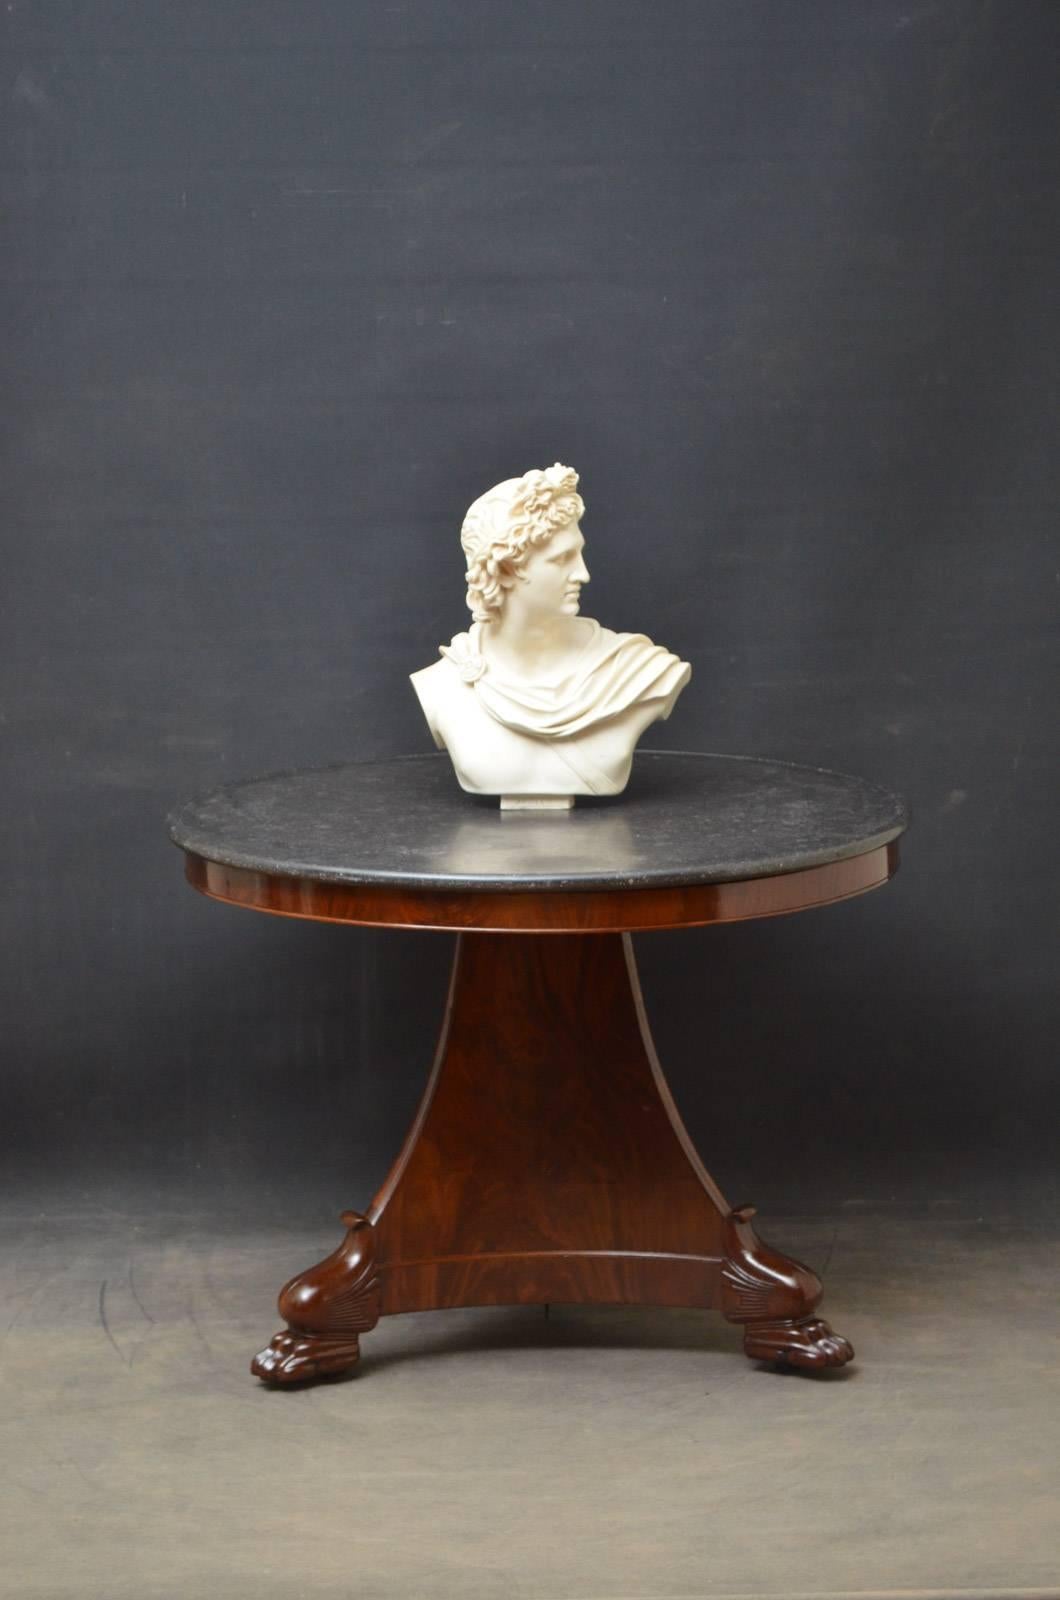 Sn4358 good size William IV centre table with black marble top and moulded frieze, standing on shaped, flamed mahogany three sided support terminating in paw feet and castors. This antique centre table has been sympathetically restored and is ready